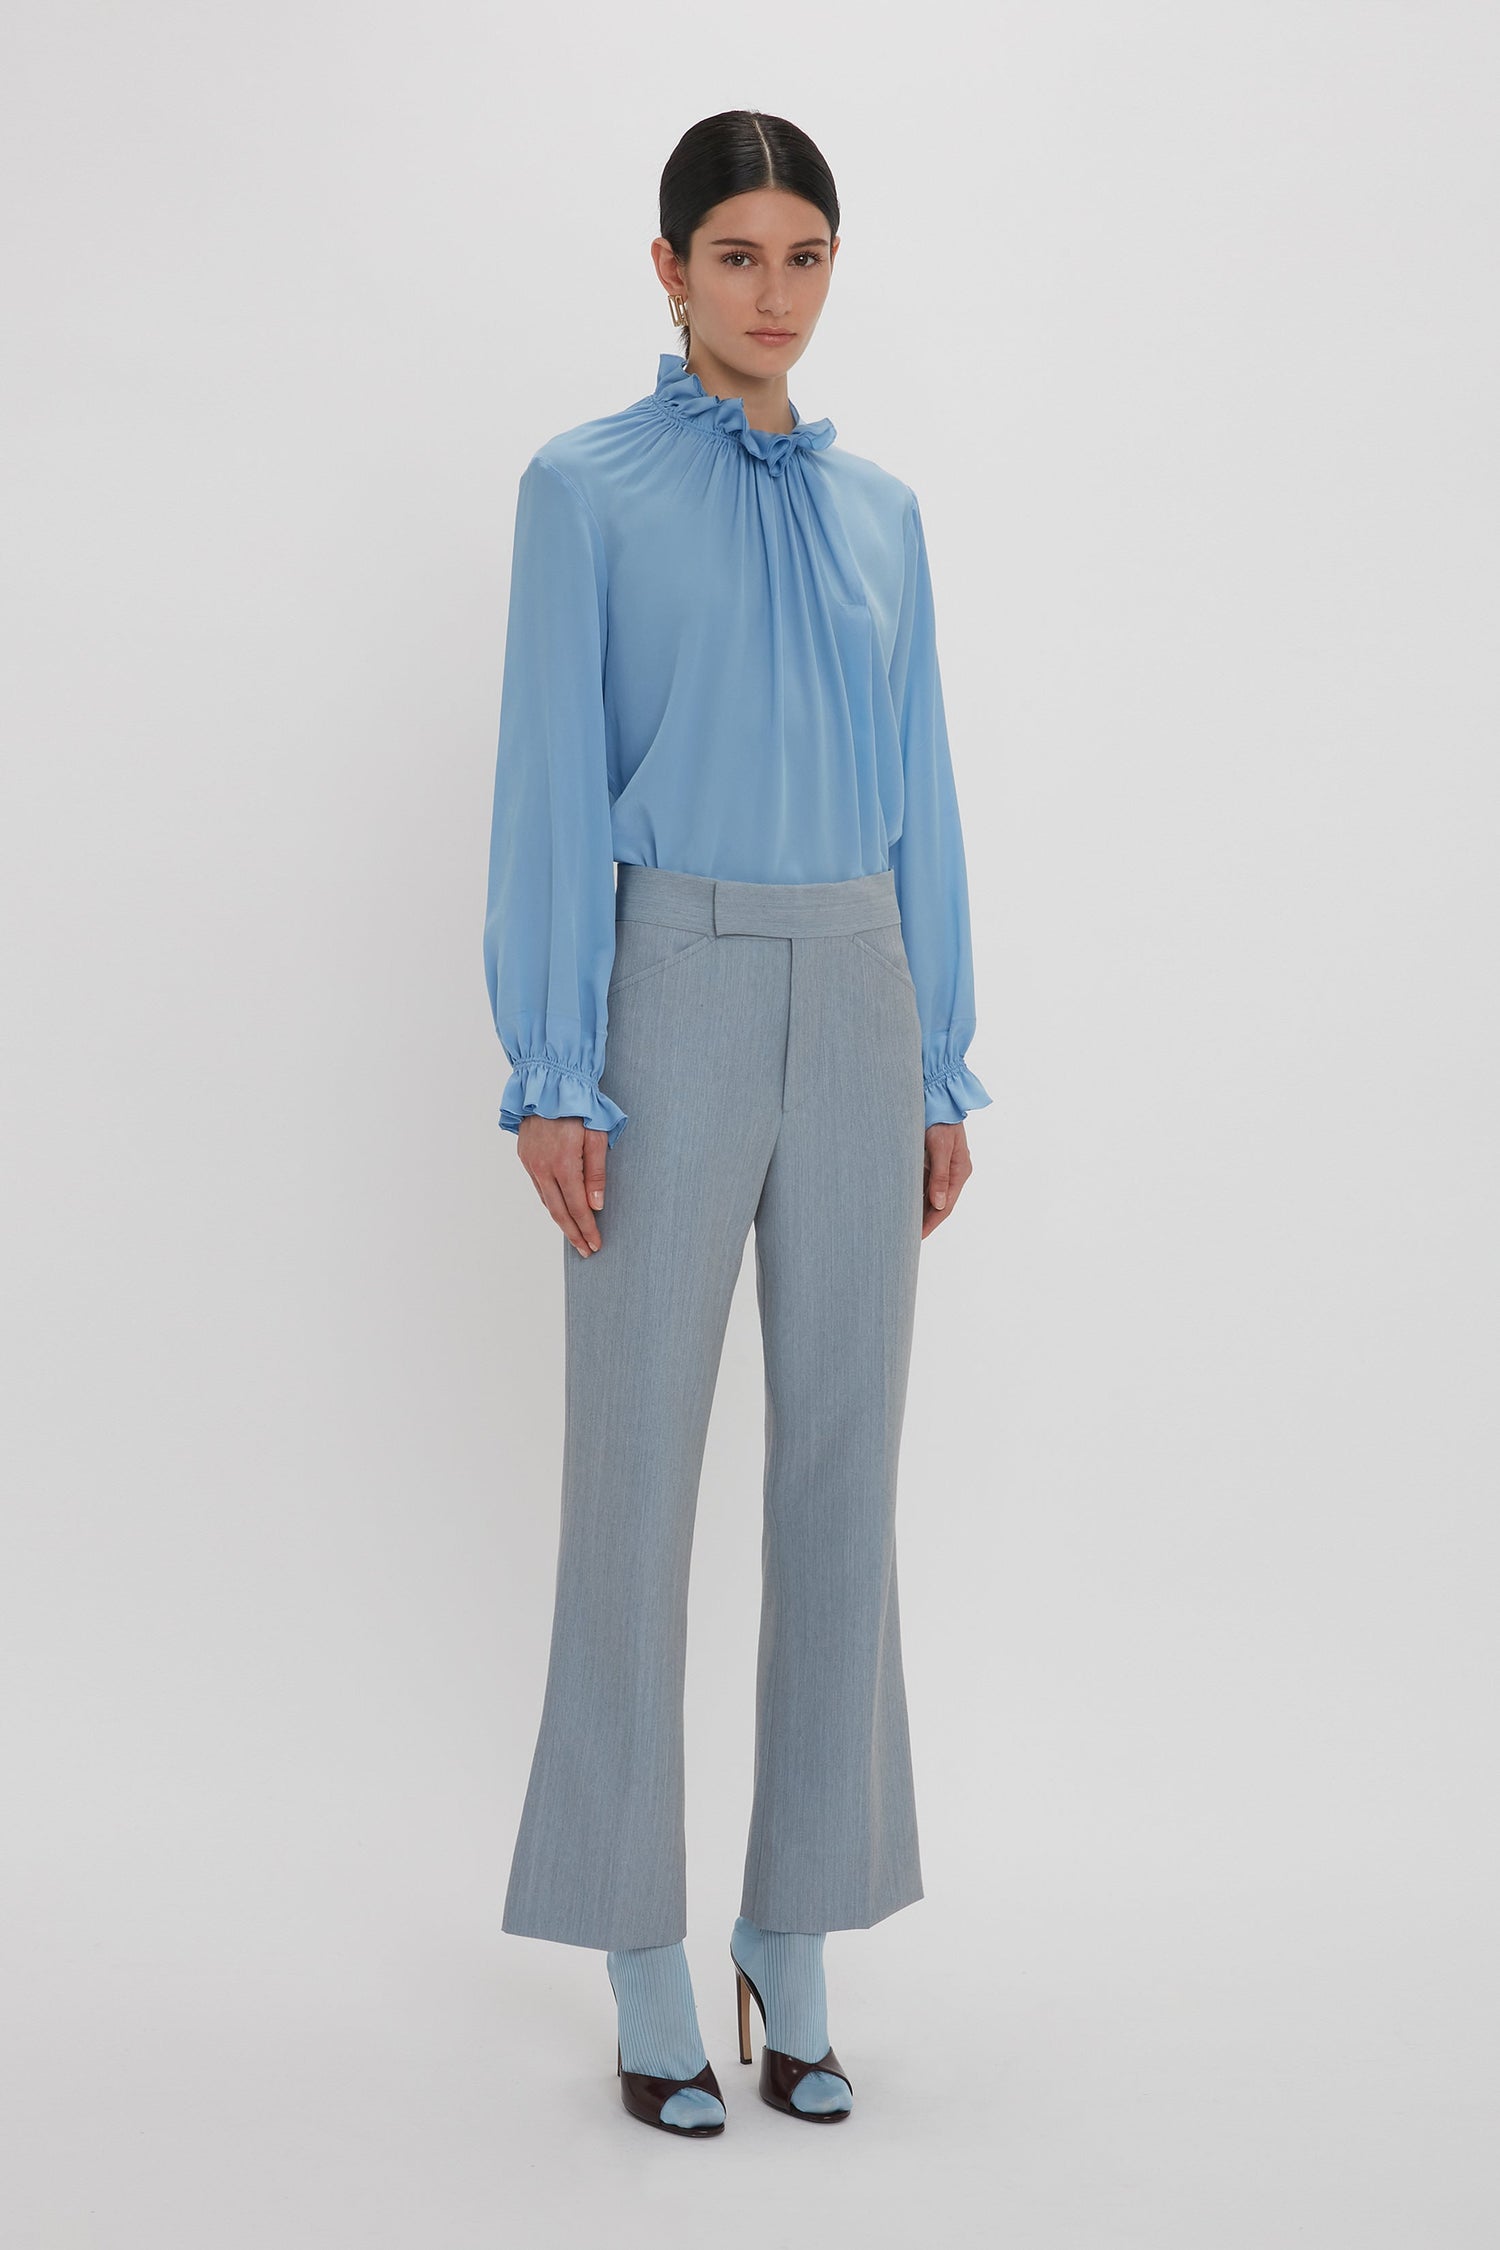 A woman stands against a plain white background, wearing the Victoria Beckham Exclusive Ruffle Neck Blouse In Cornflower Blue made from crepe de chine fabric, gray high-waisted pants, and matching cornflower blue shoes with open toes.